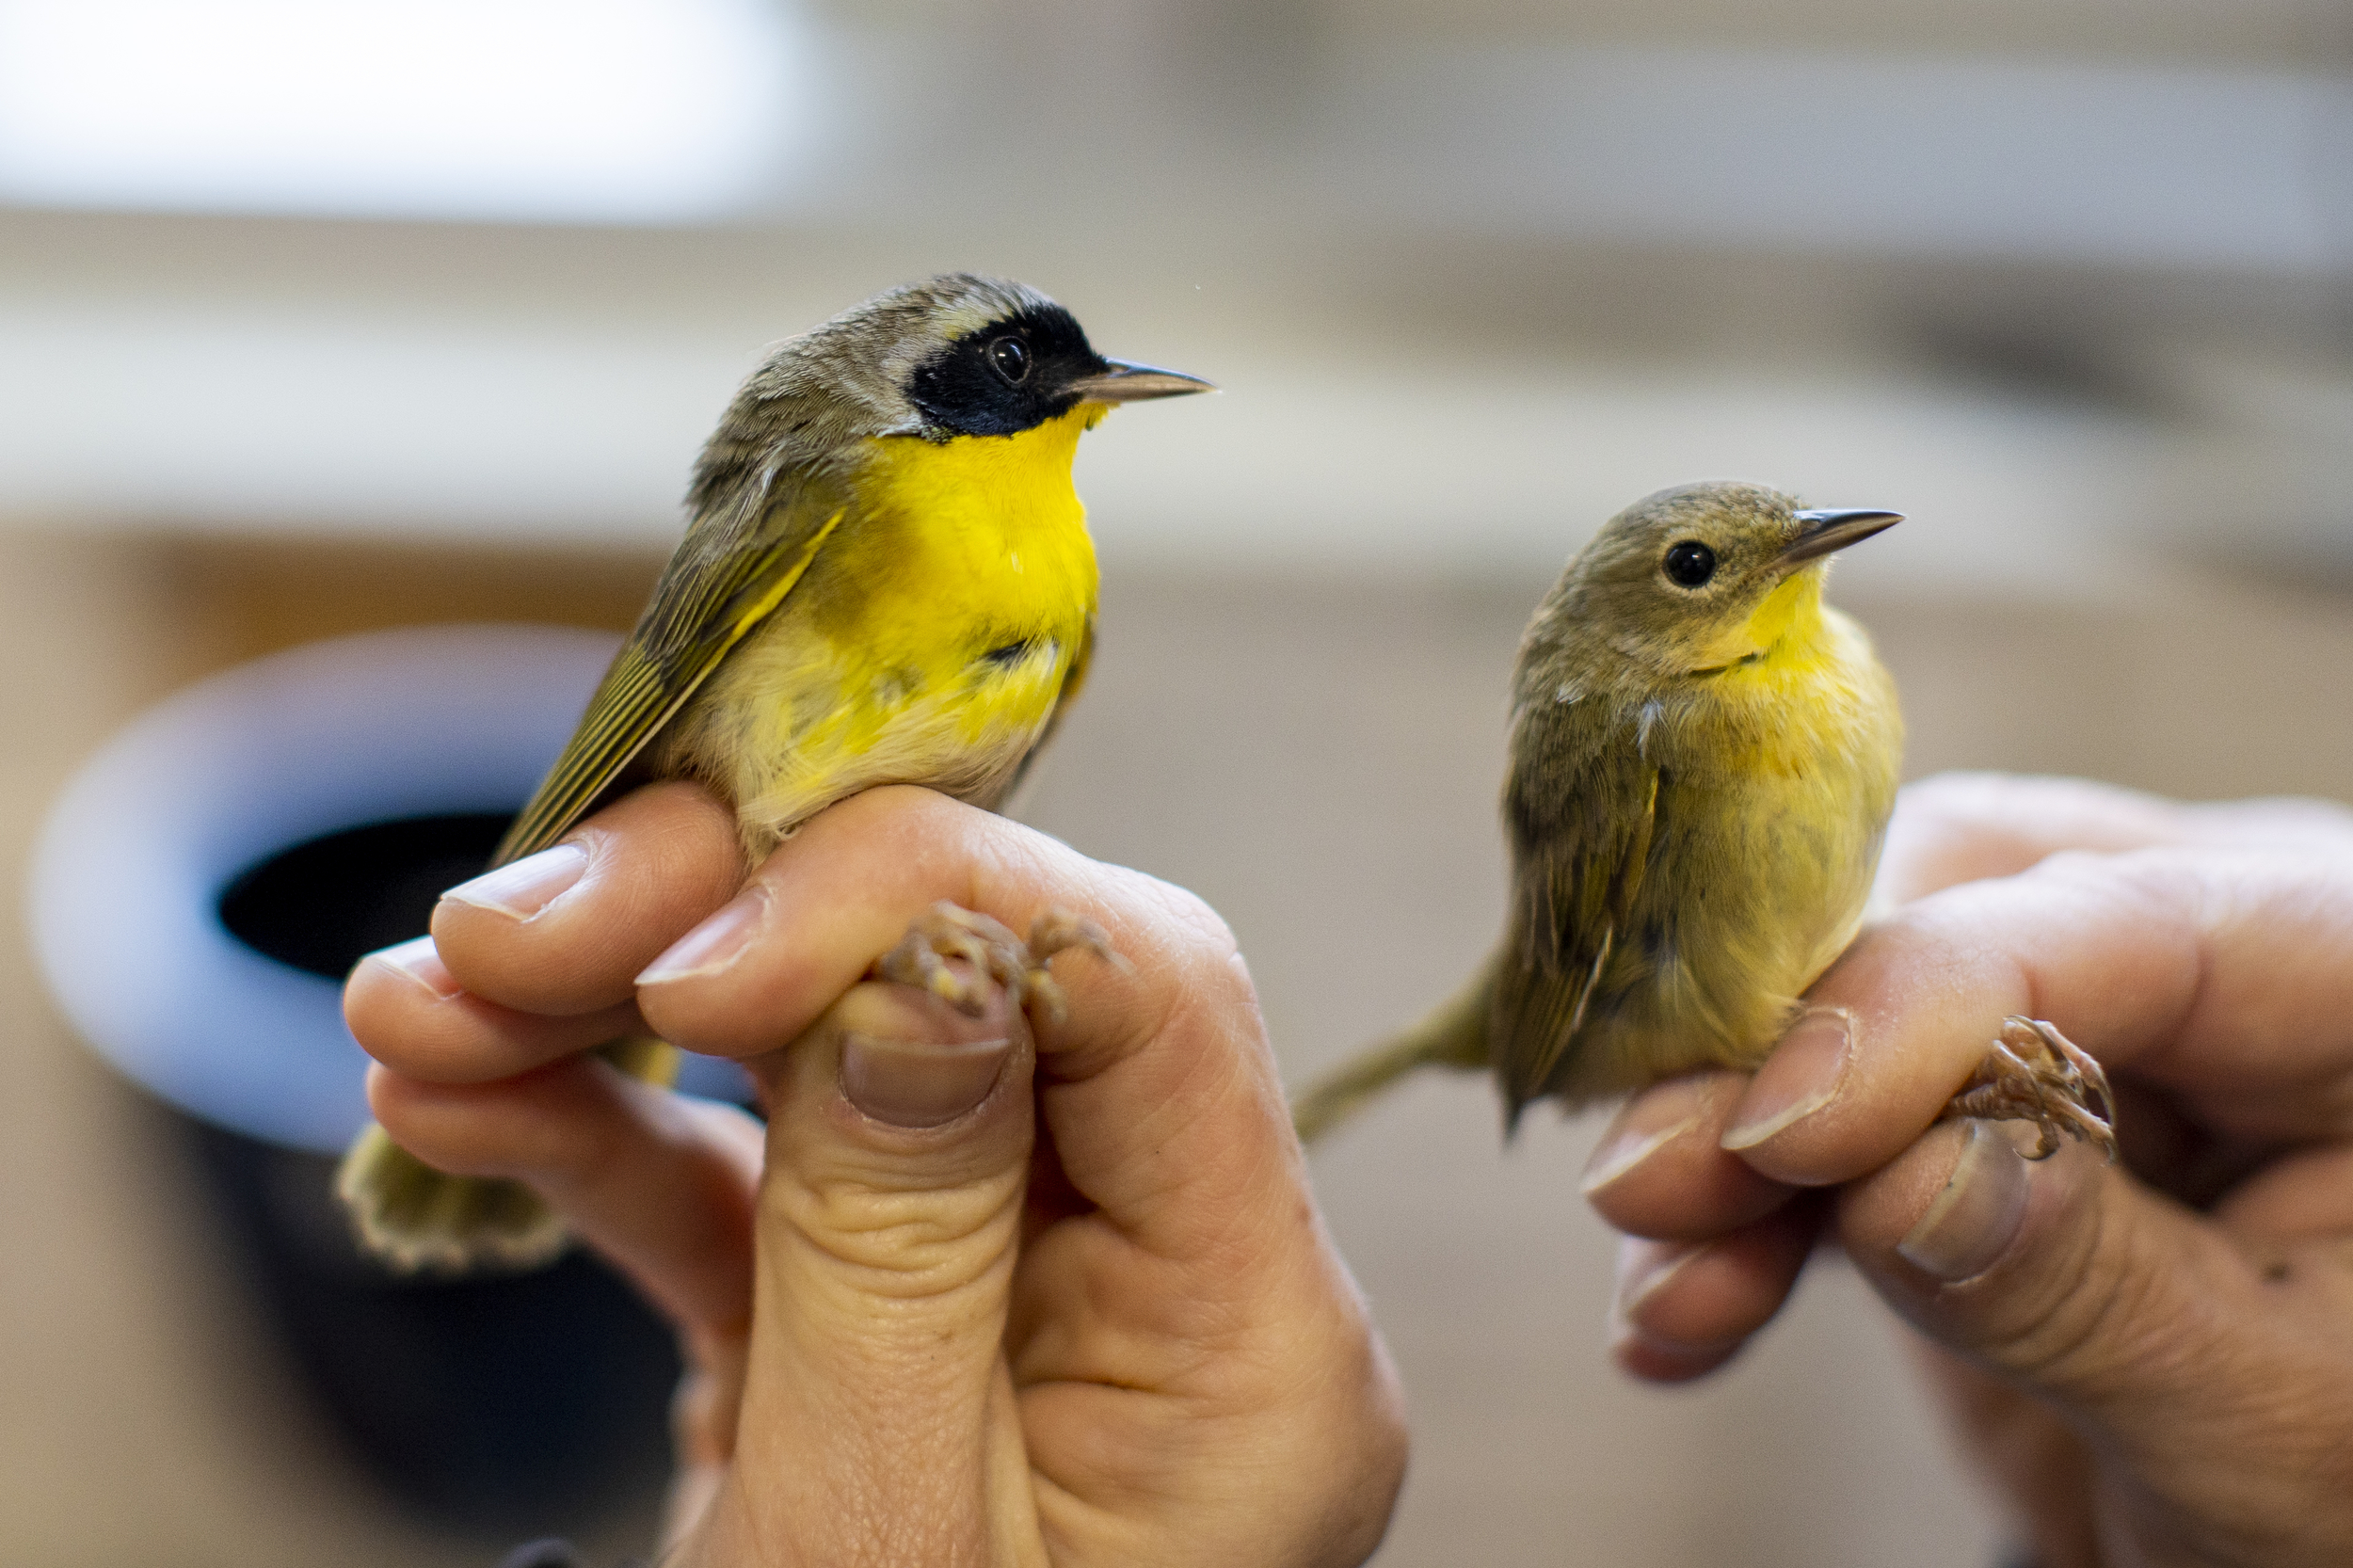 A close up of two people's hands, holding a male and female yellow warblers. The male has a wash of black over its eyes.